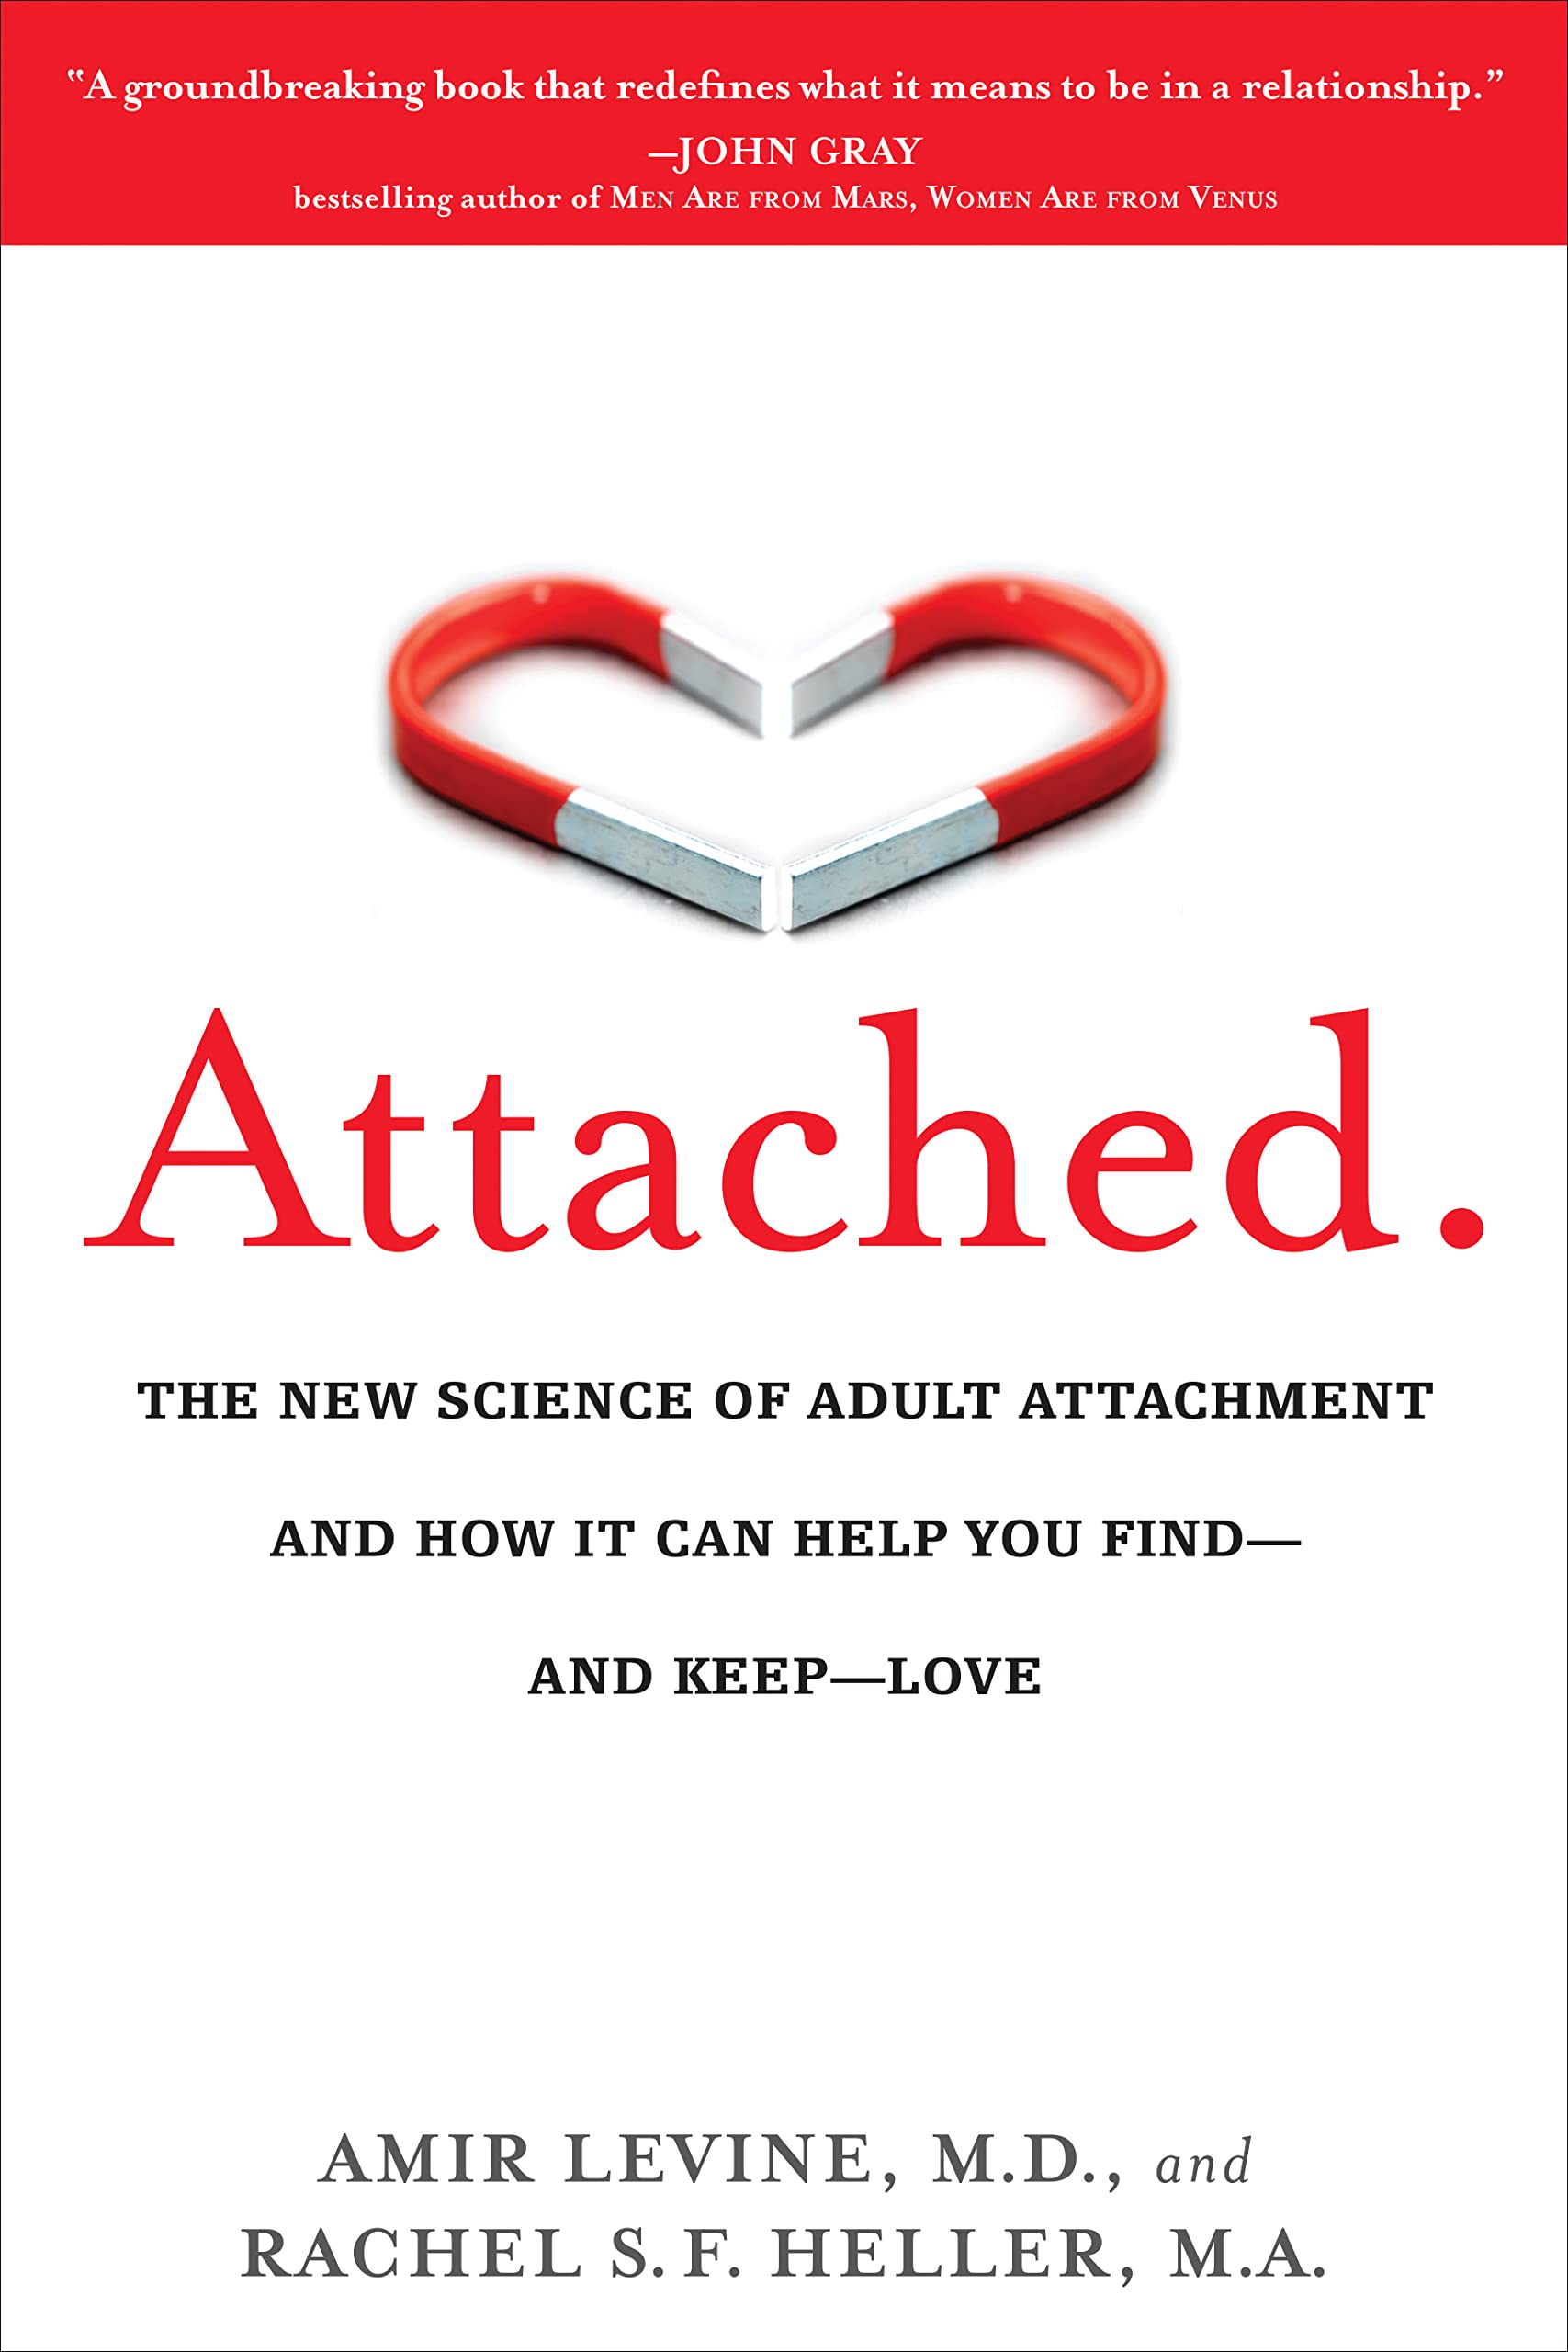 Attached- The New Science of Adult Attachment and How It Can Help YouFind - and Keep - Love